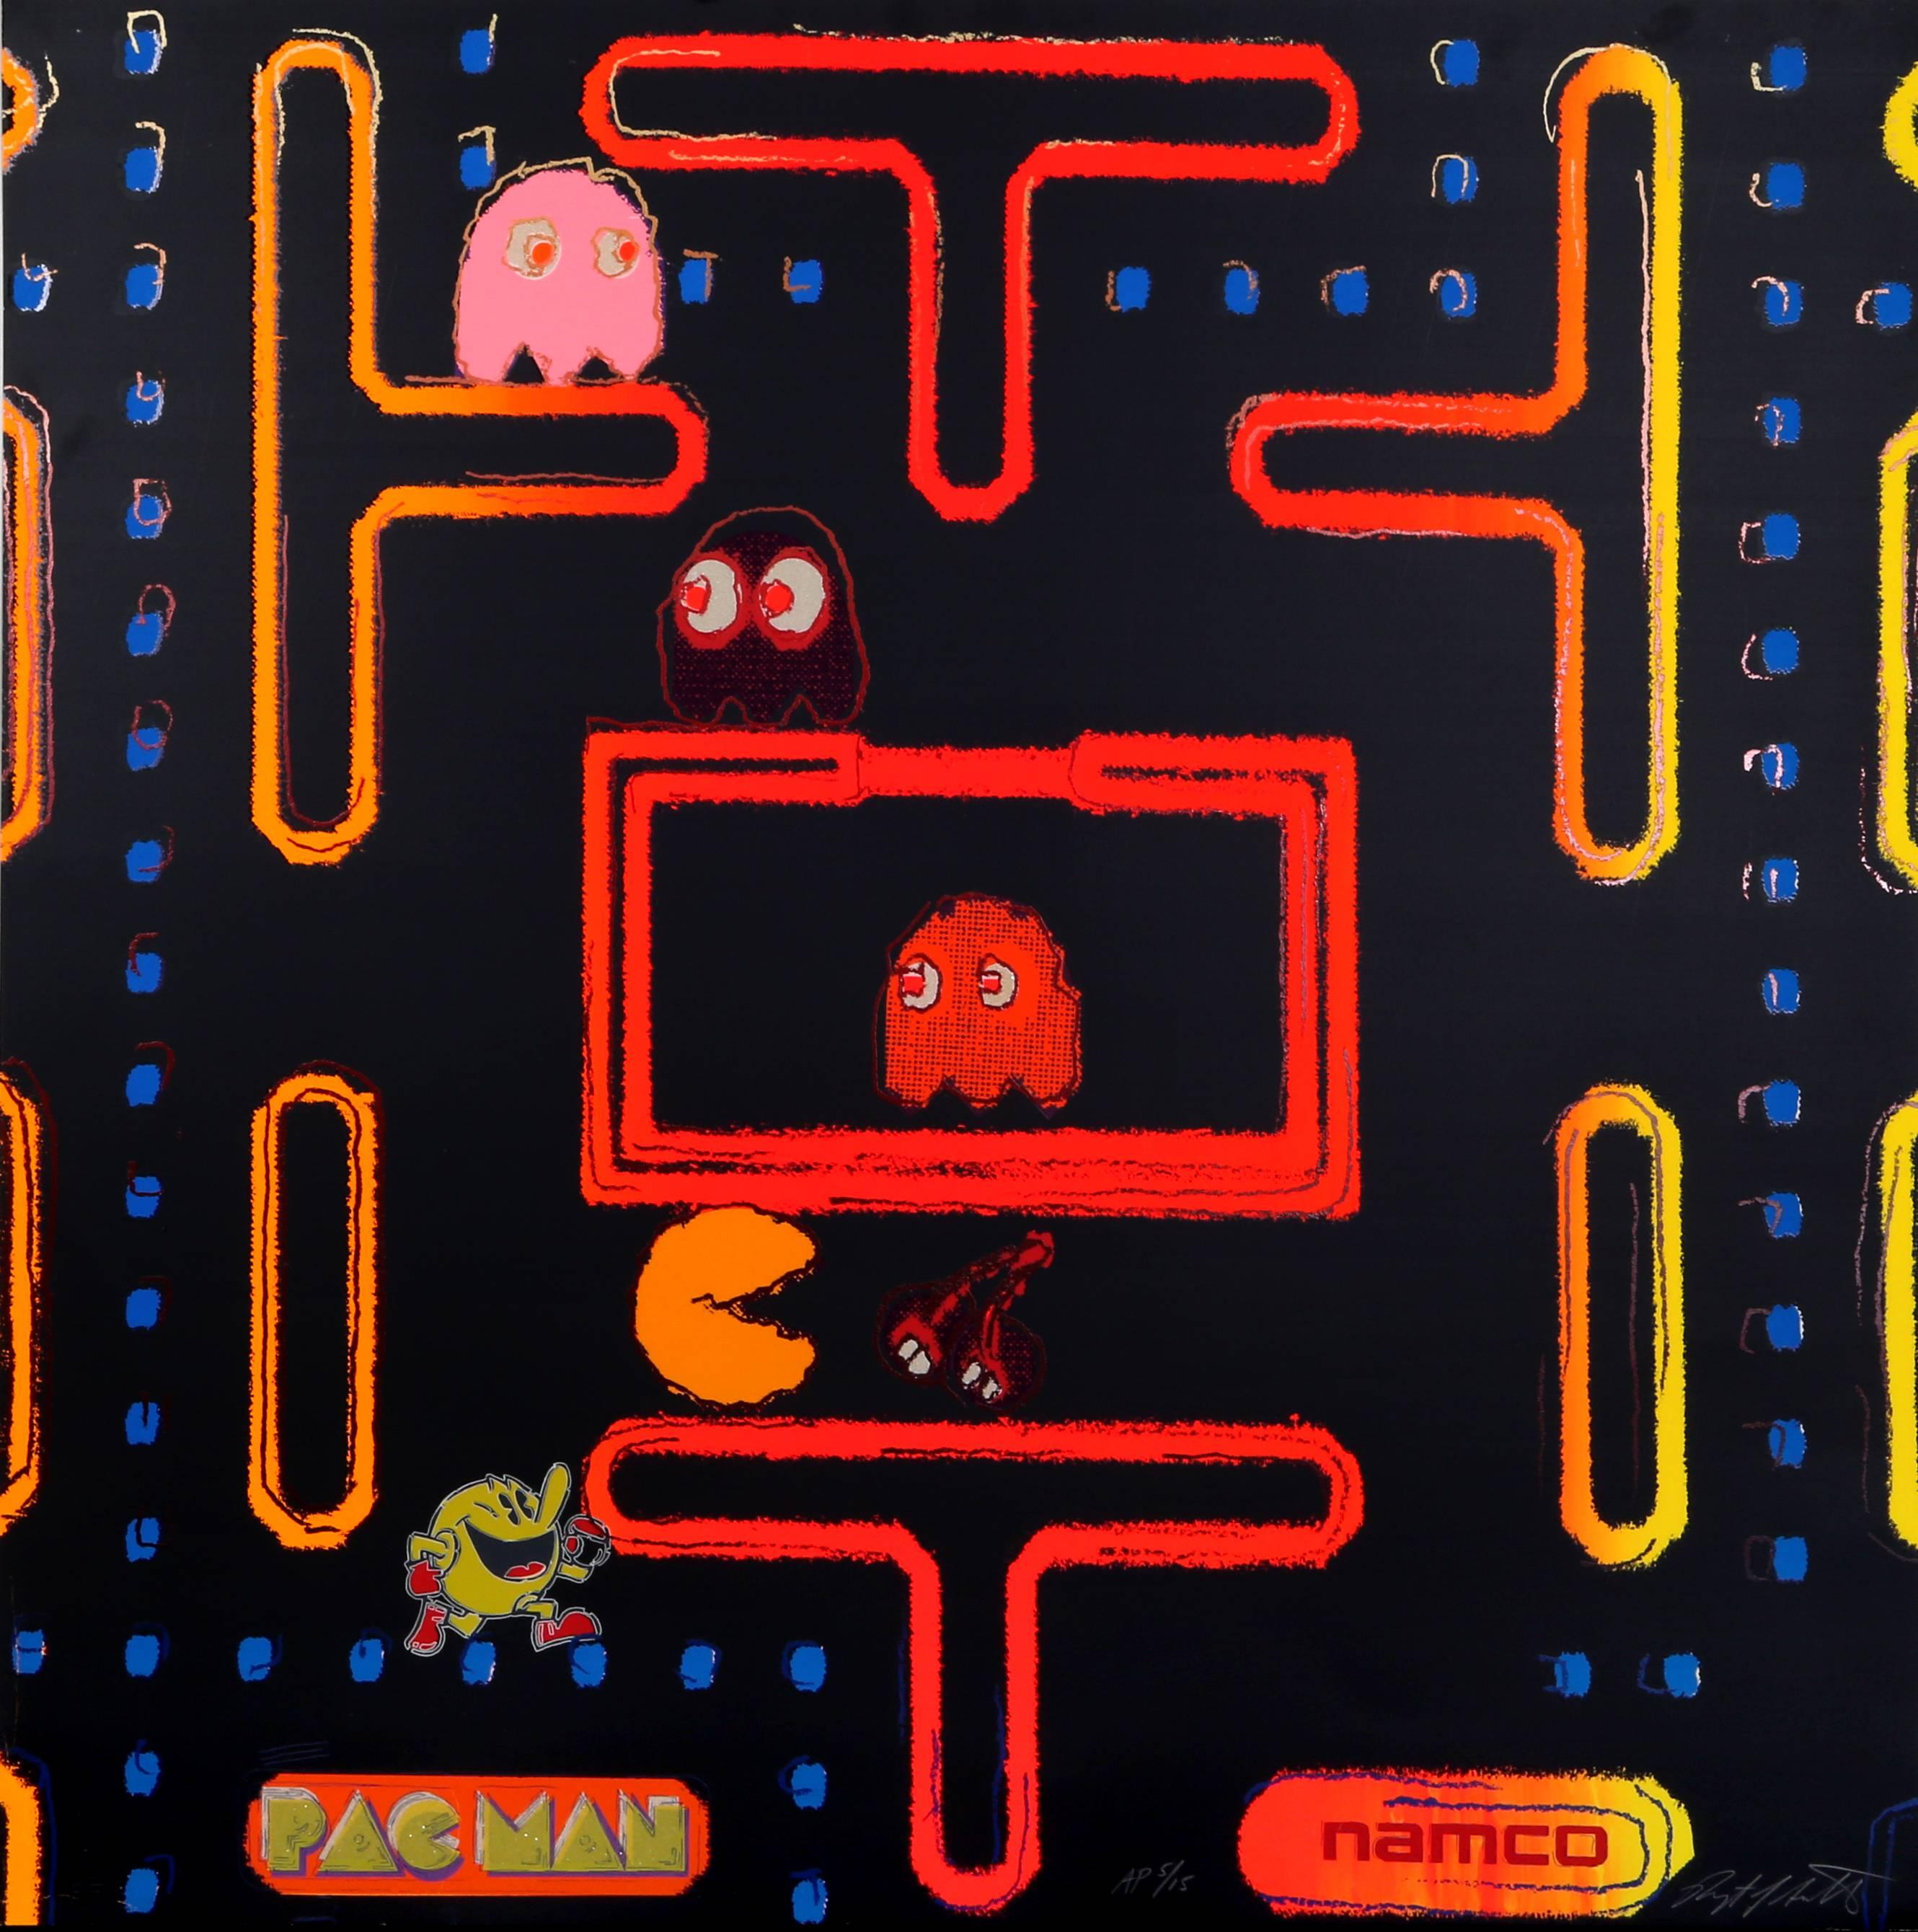 Pac-Man from the Homage to Andy Warhol Portfolio, Pop Art de Rupert Smith